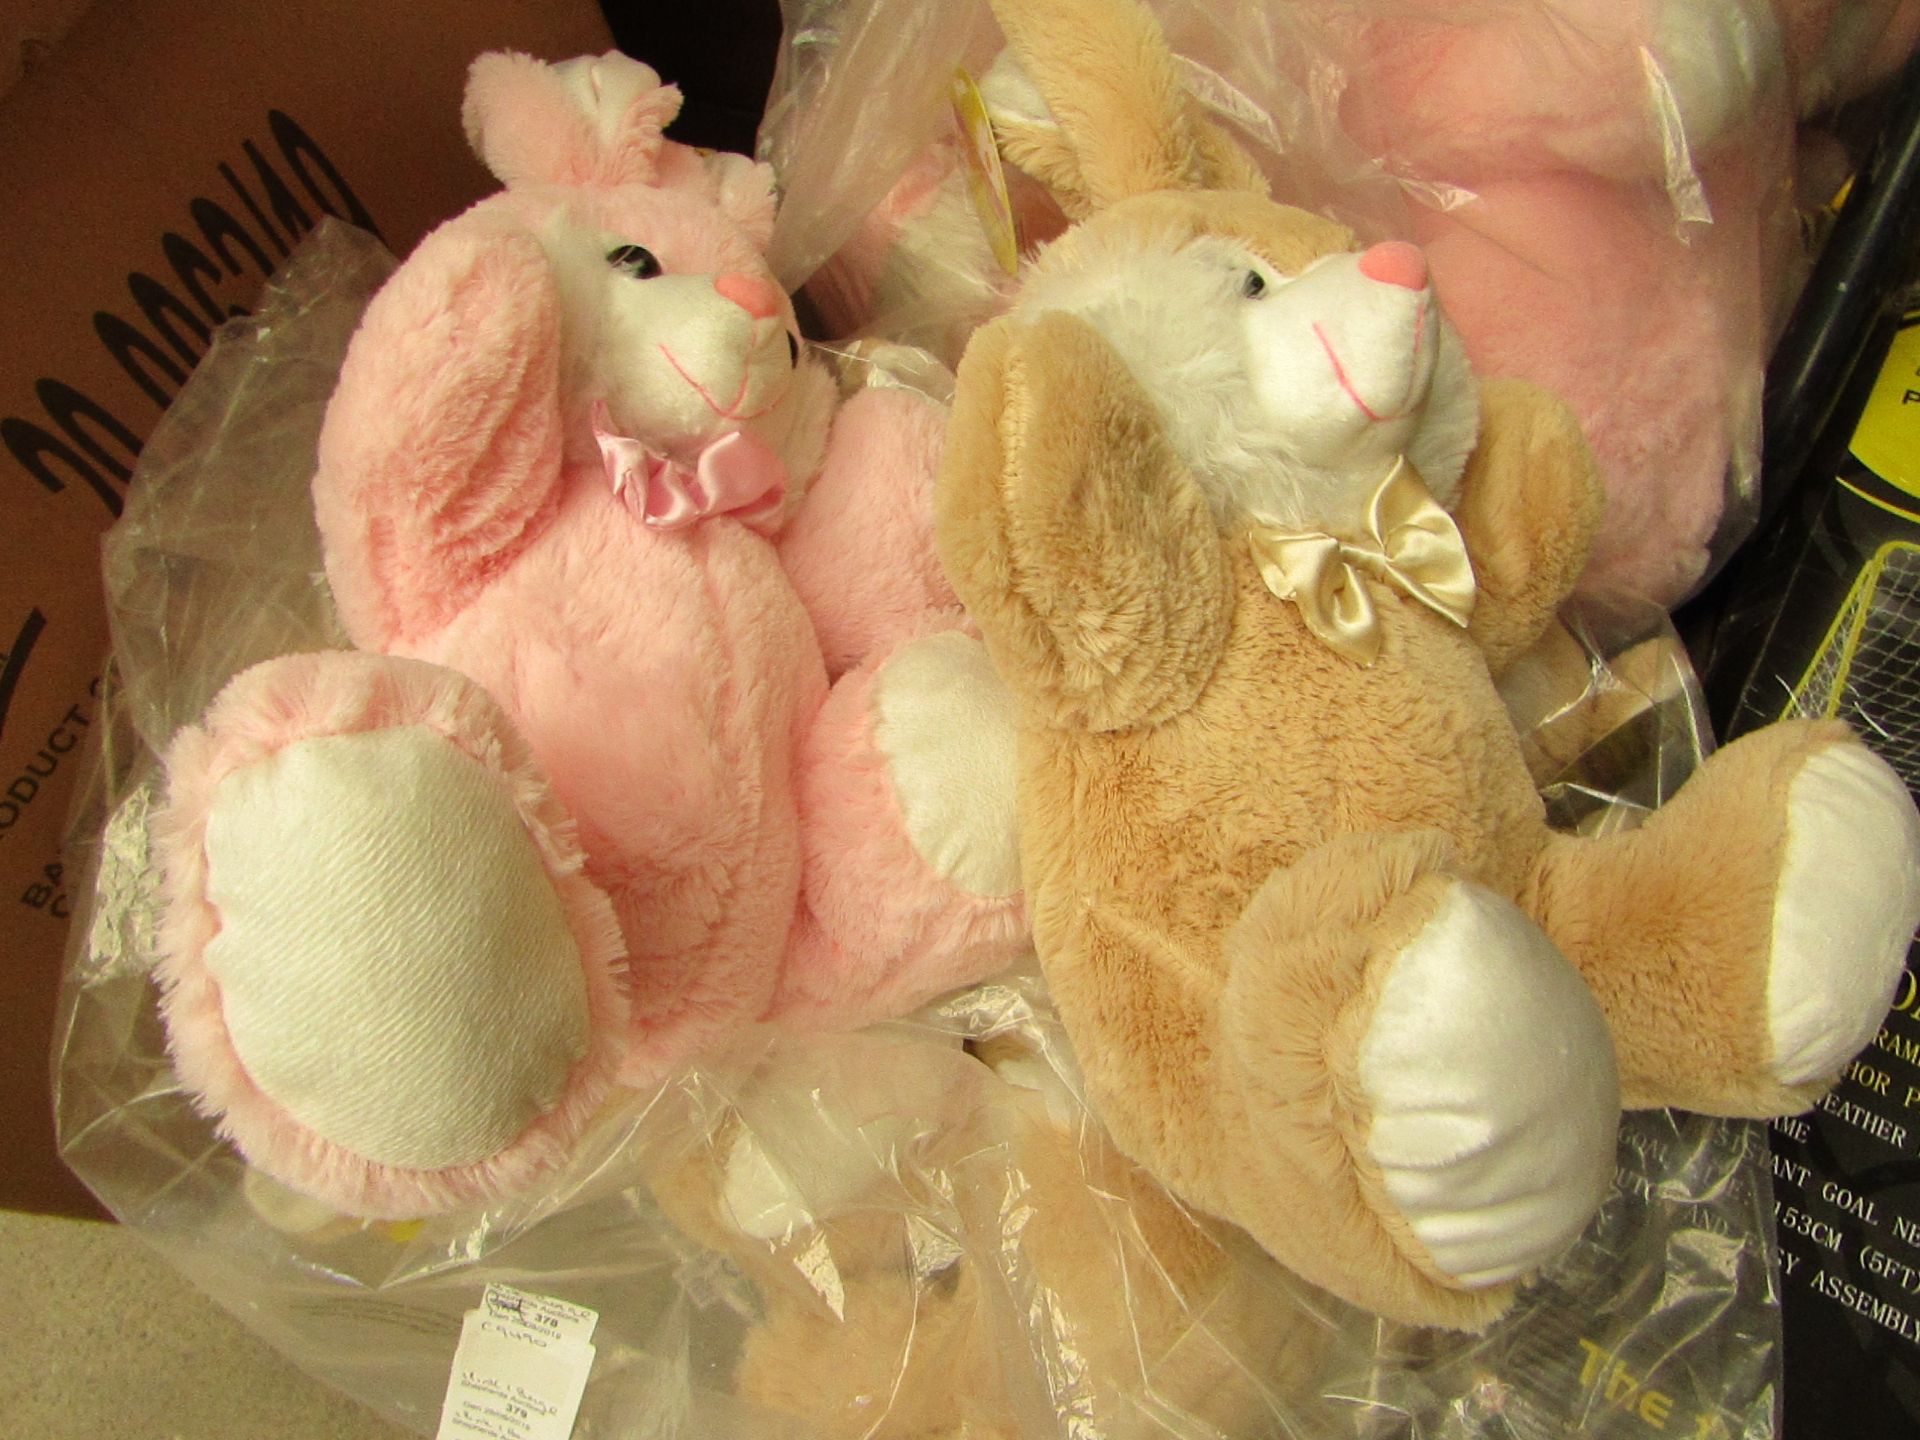 2x Lovable Bunnies, 1 pink, 1 beige, both new.